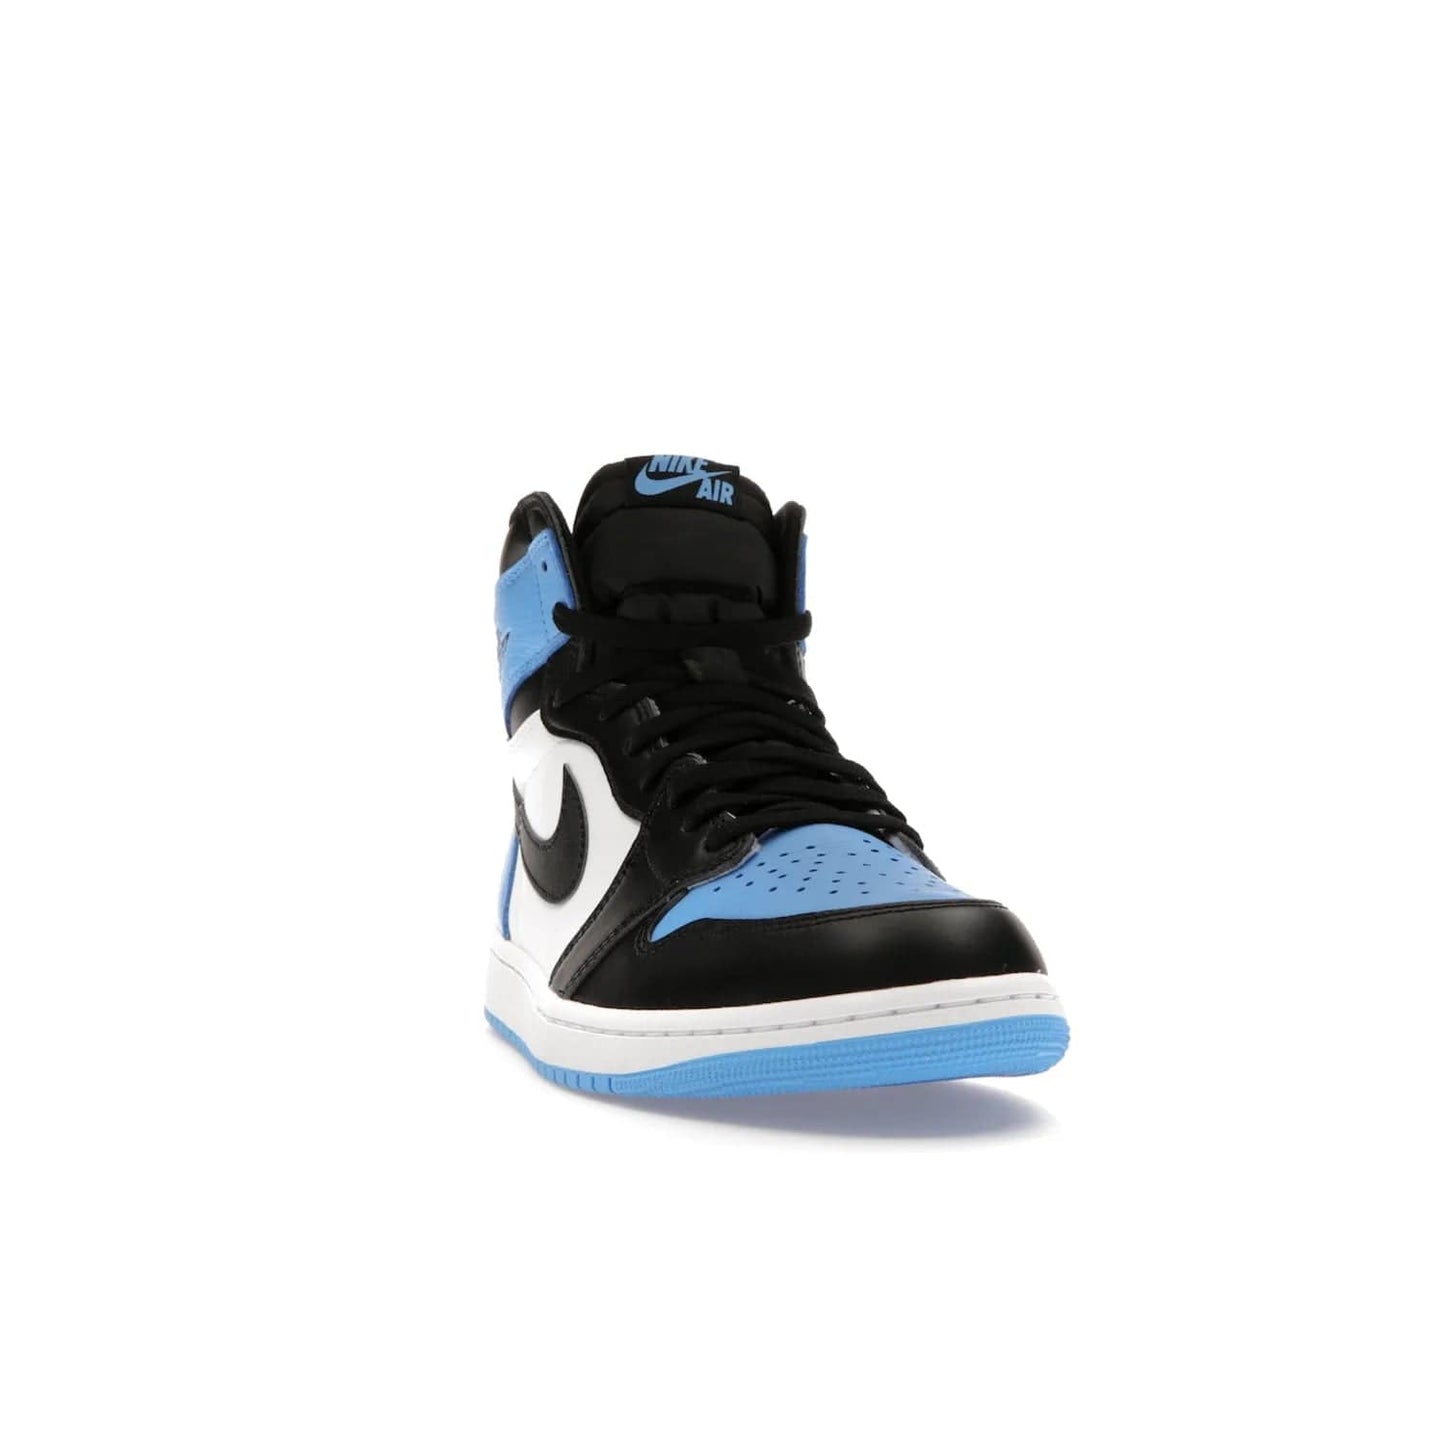 Jordan 1 Retro High OG UNC Toe - Image 8 - Only at www.BallersClubKickz.com - Jordan 1 High OG UNC Toe is a fashionable, high-quality sneaker featuring University Blue, Black White and White. Releasing July 22, 2023, it's the perfect pick up for sneakerheads.